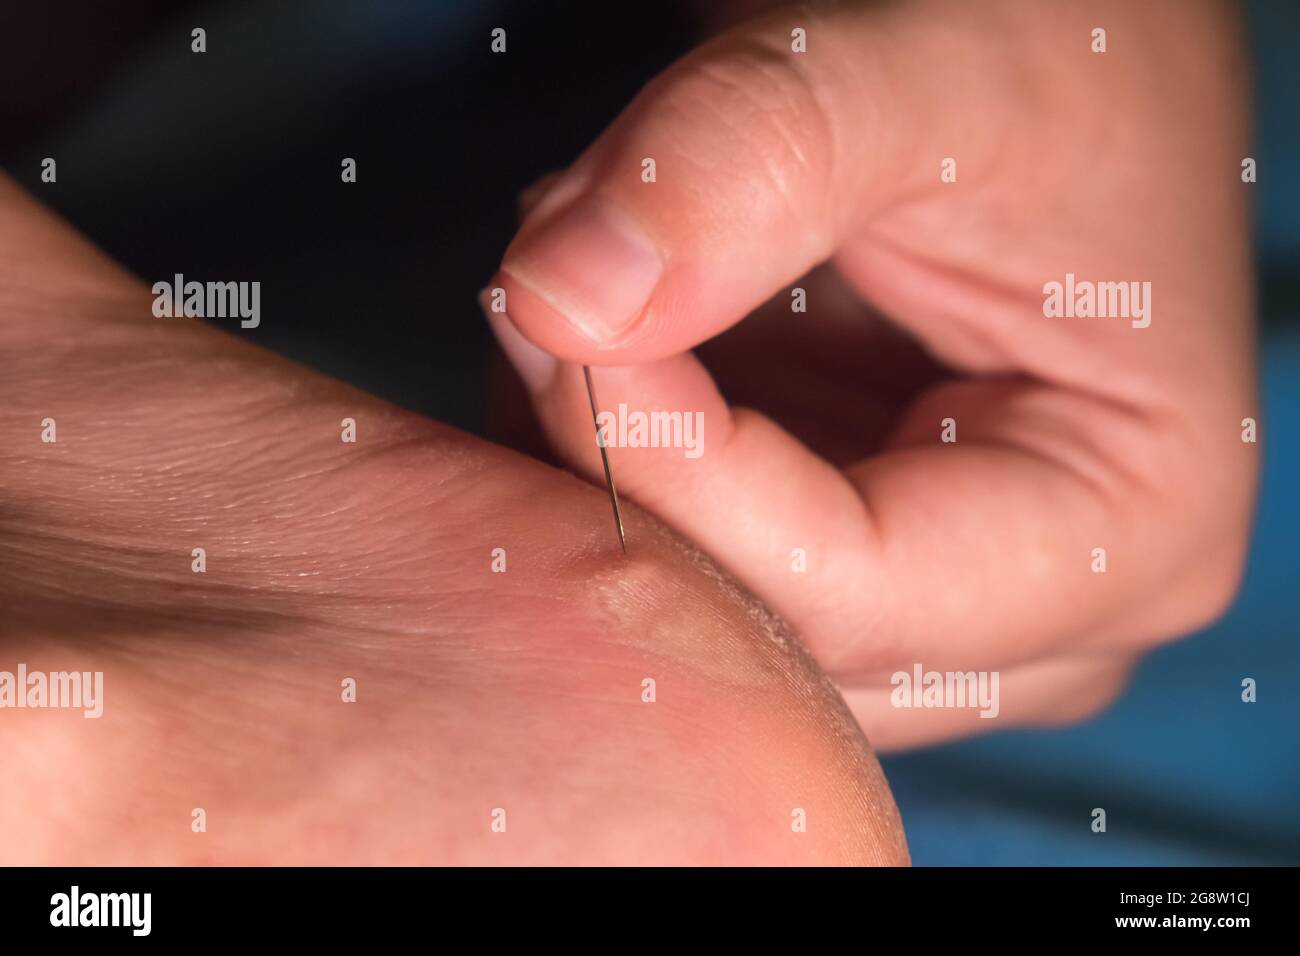 Women's fingers pierce a callus on the heel with a needle. Close-up Stock Photo